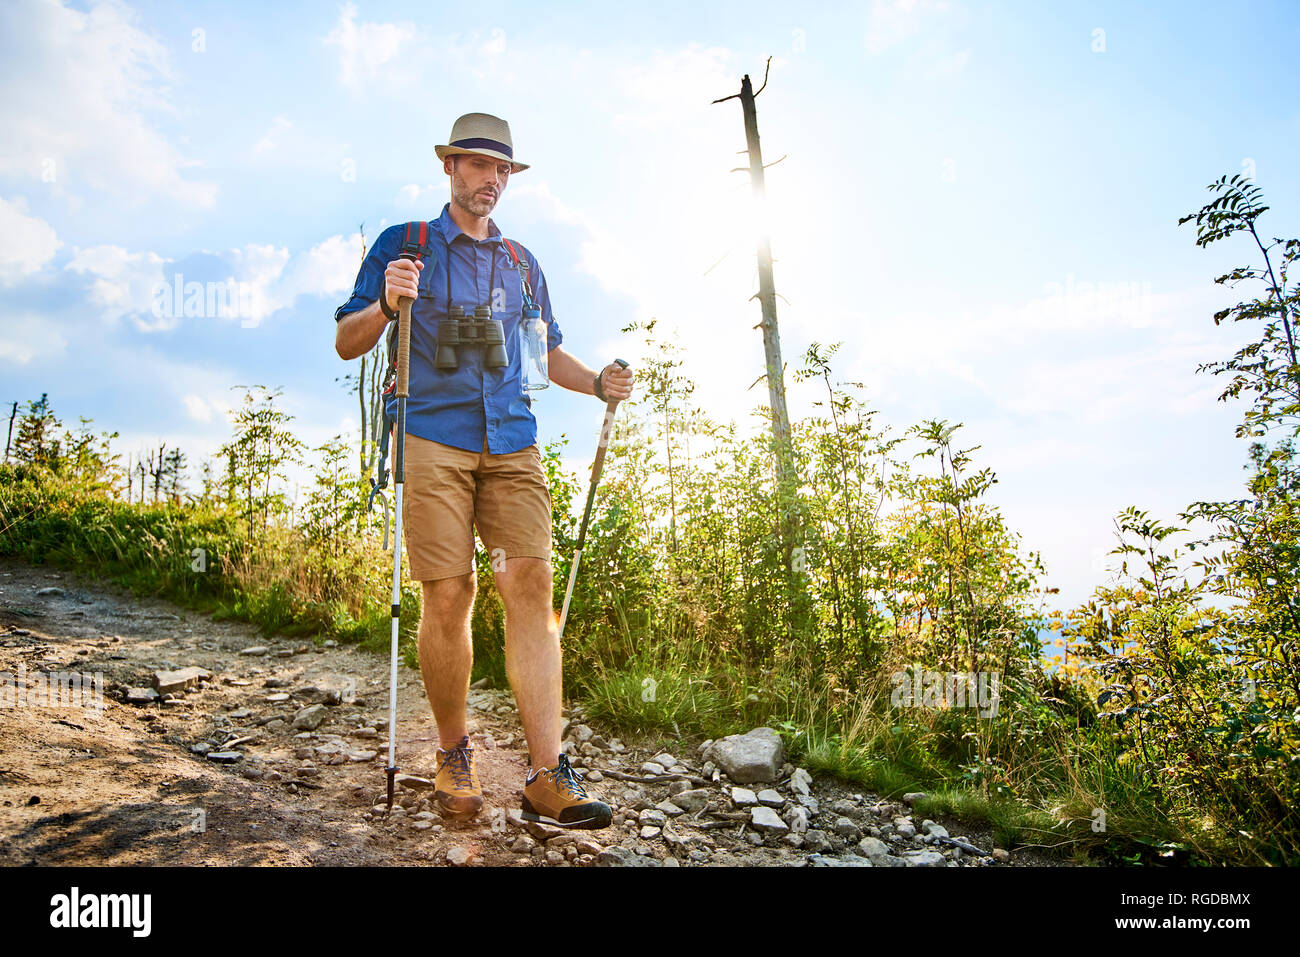 Man walking carefully with hiking poles on trail Stock Photo